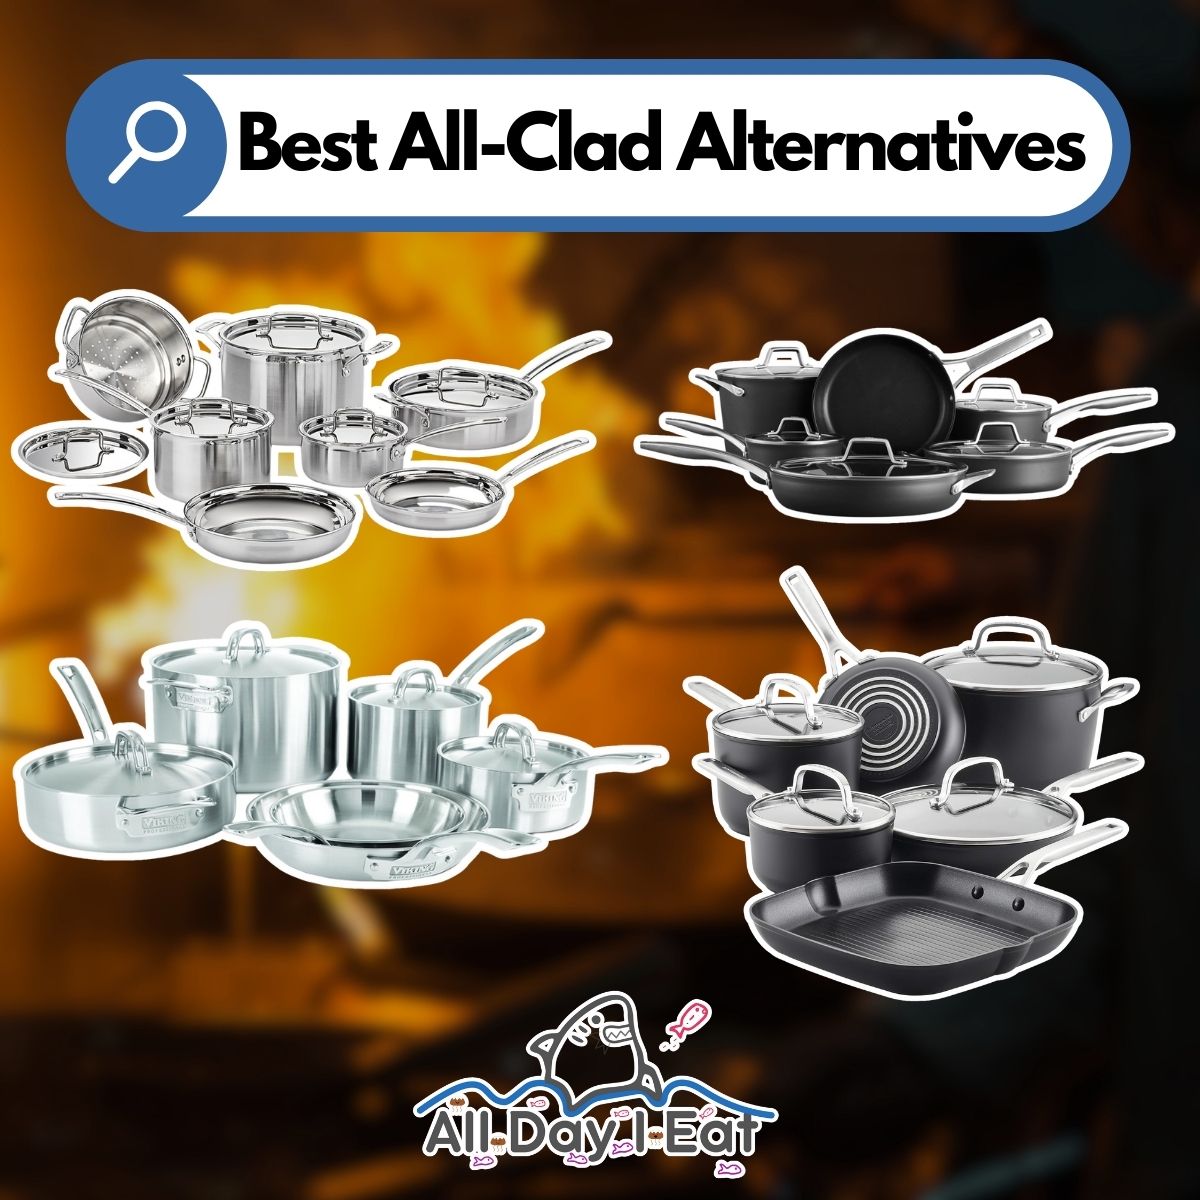 https://cdn.alldayieat.com/wp-content/uploads/2023/10/1-A-graphic-shows-All-Clad-alternative-cookware-laid-out-on-a-blurred-background.-Graphics-by-Wendell-Adrian-Quijado.jpg